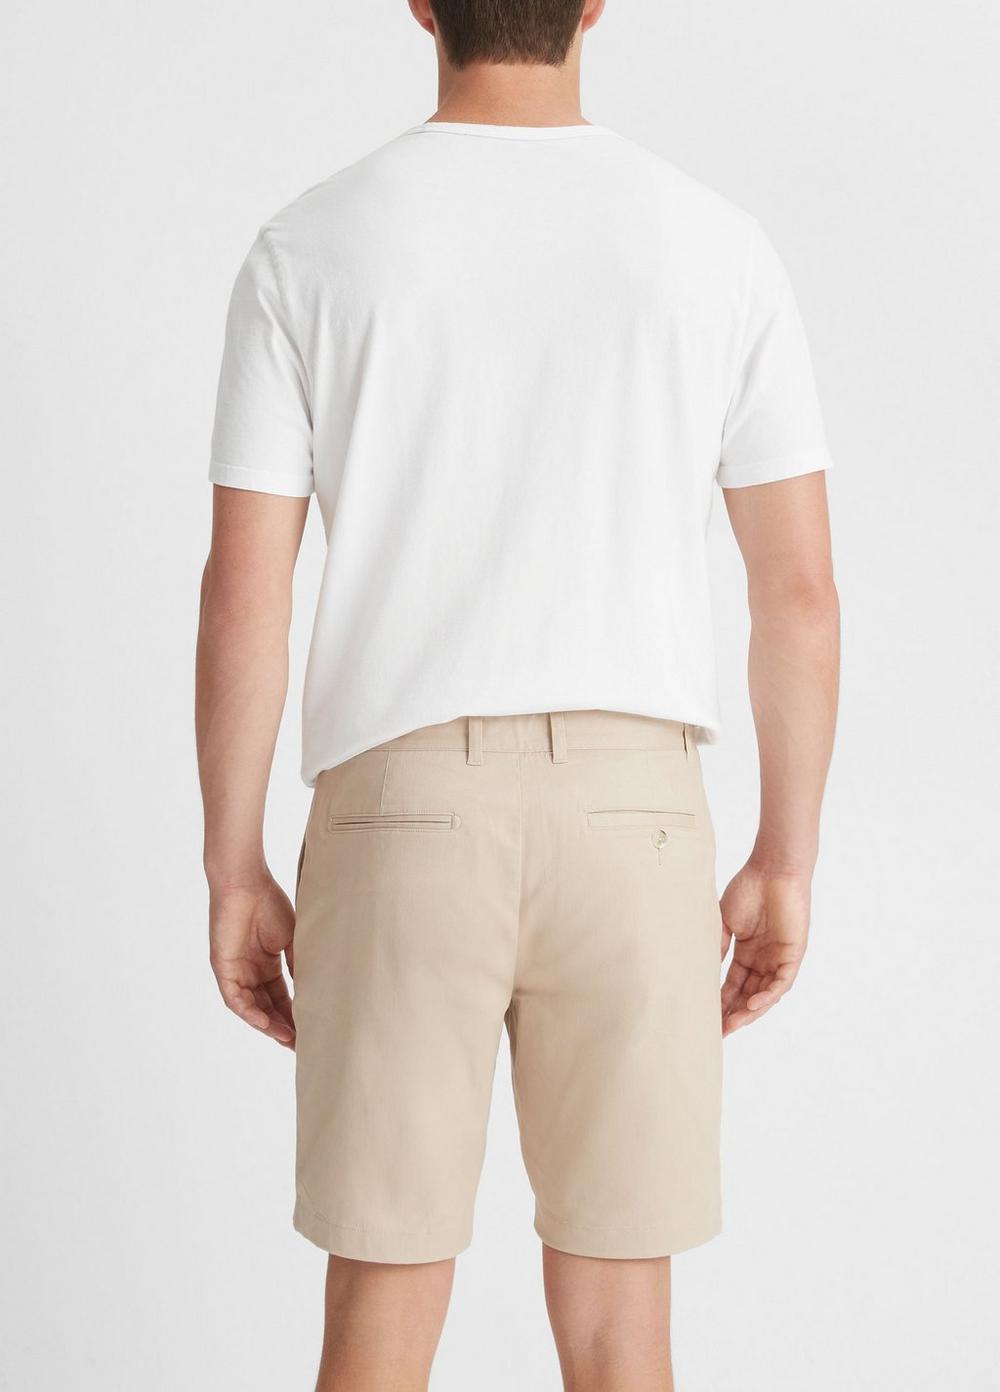 Brushed Twill Griffith Chino Short in Vince Products | Vince